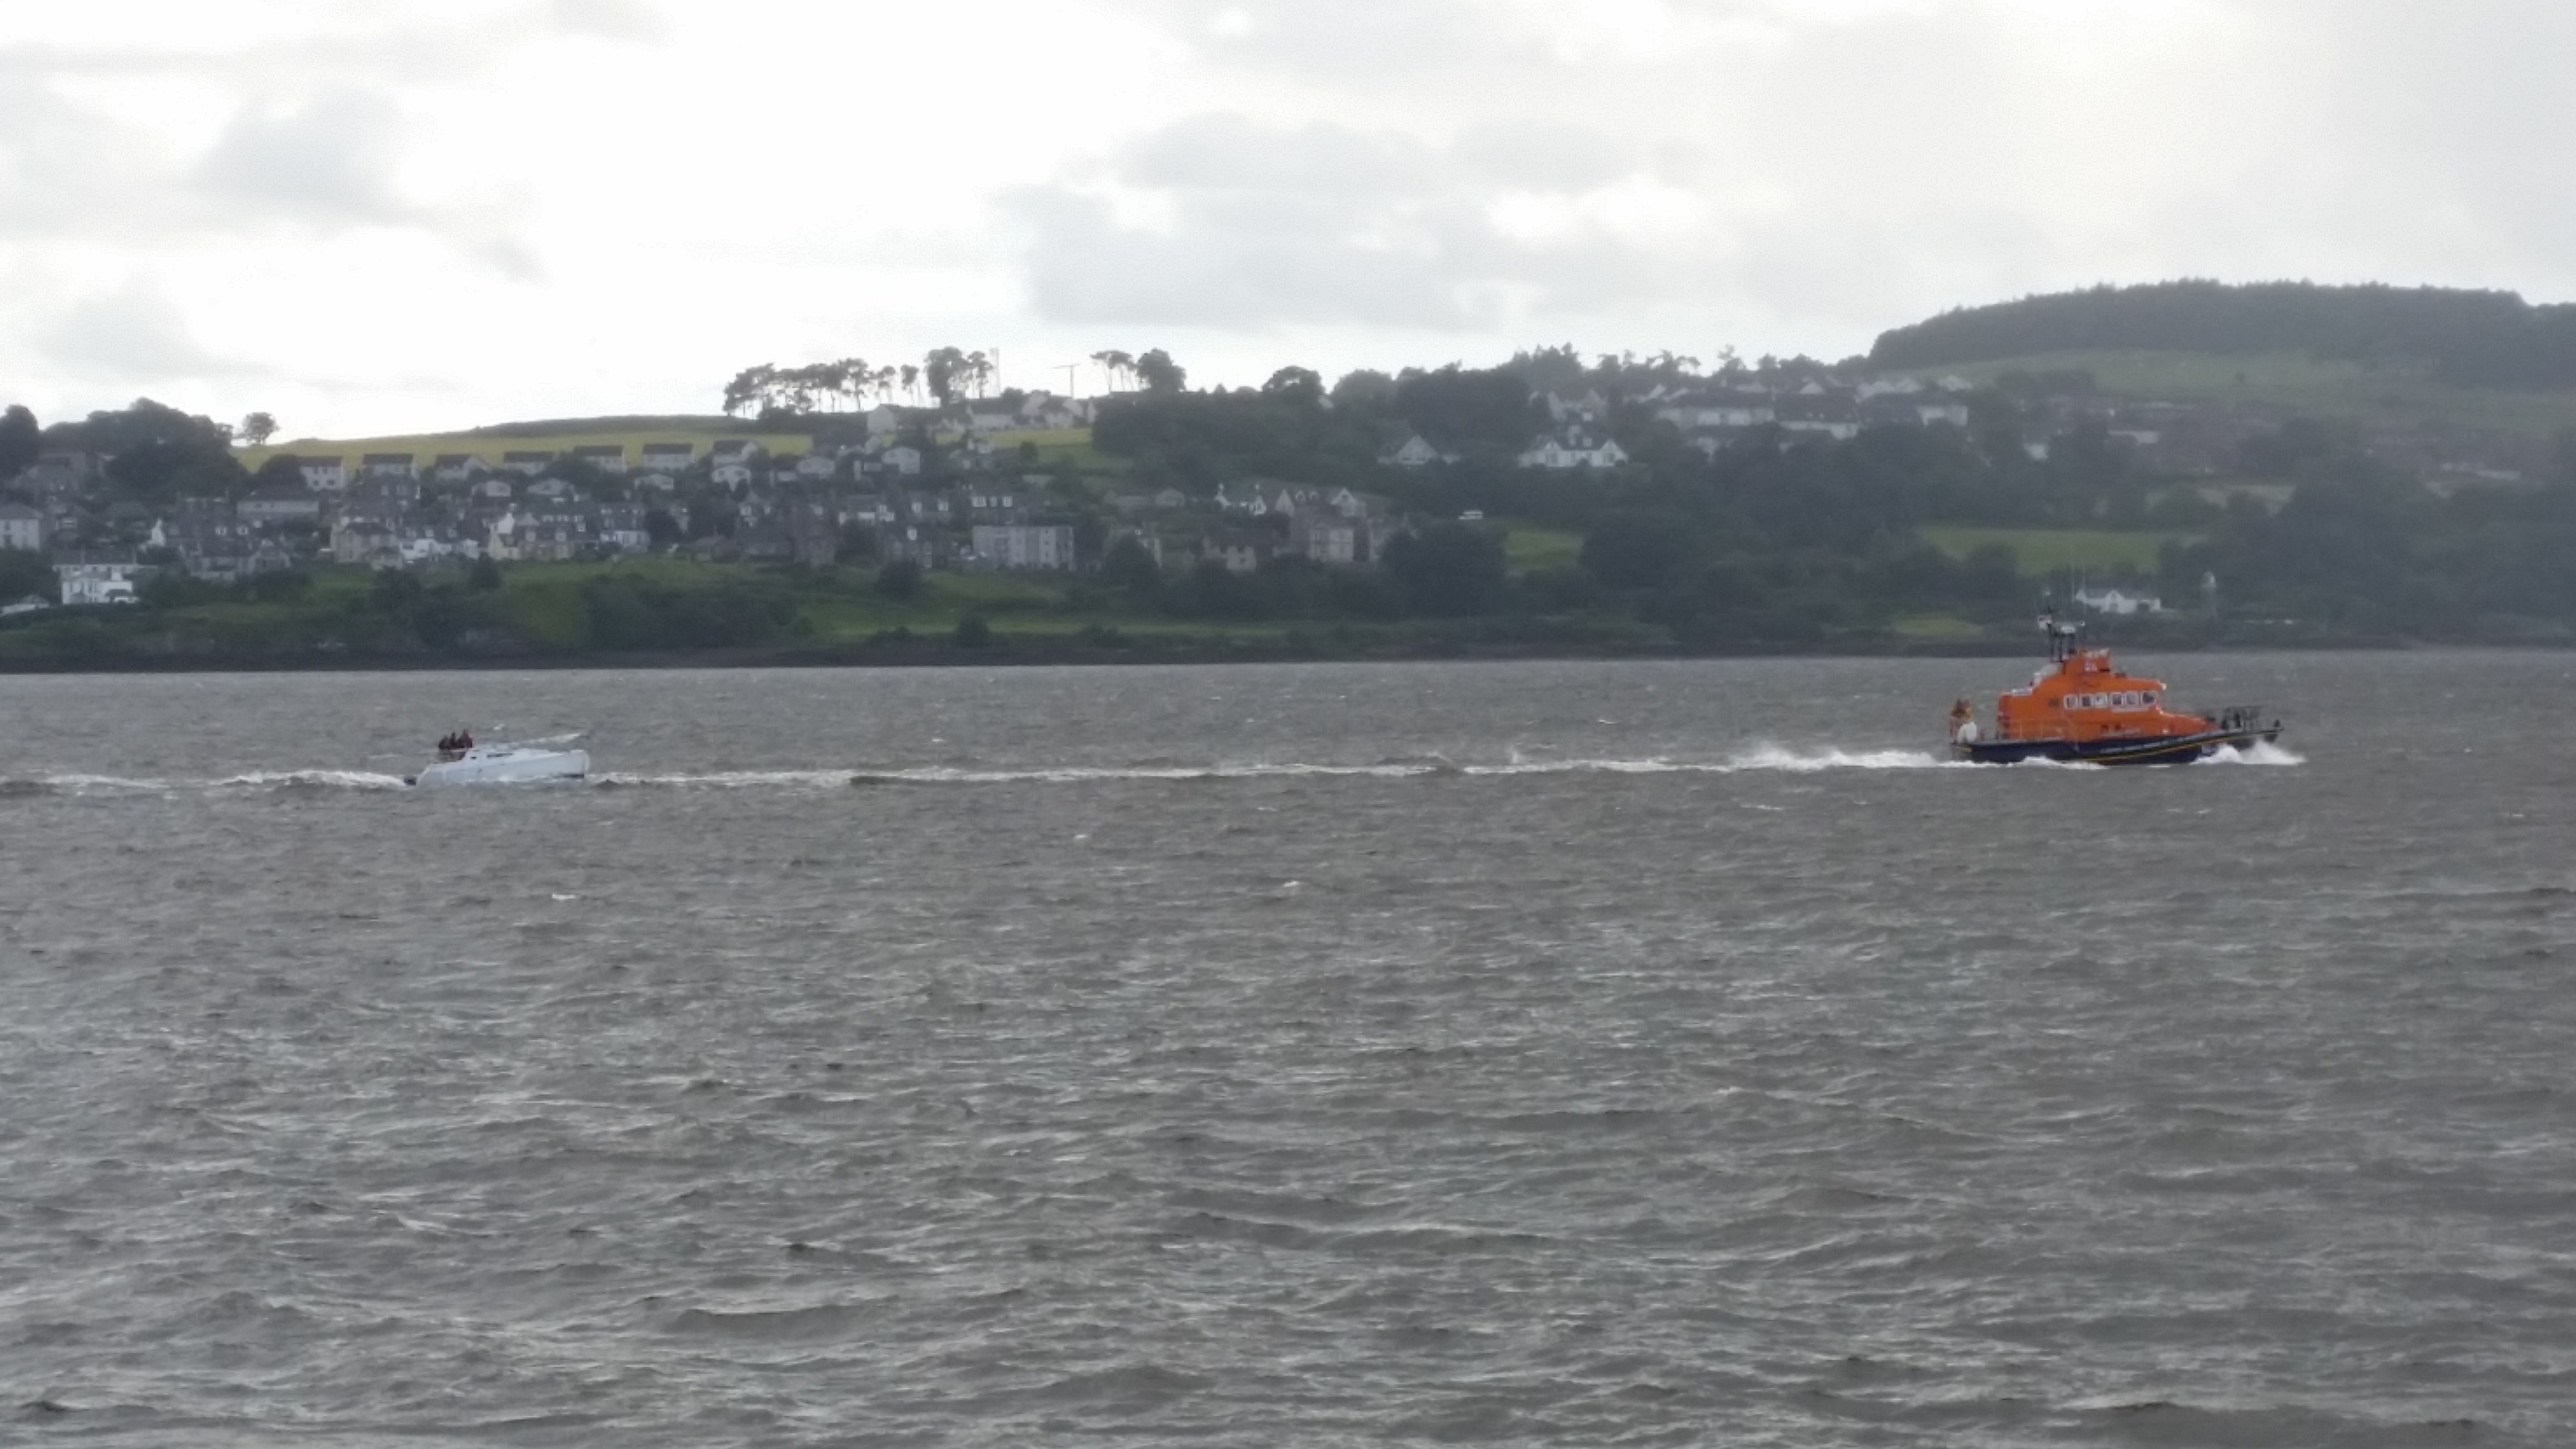 The all-weather lifeboat from Broughty Ferry towing the stricken yacht.